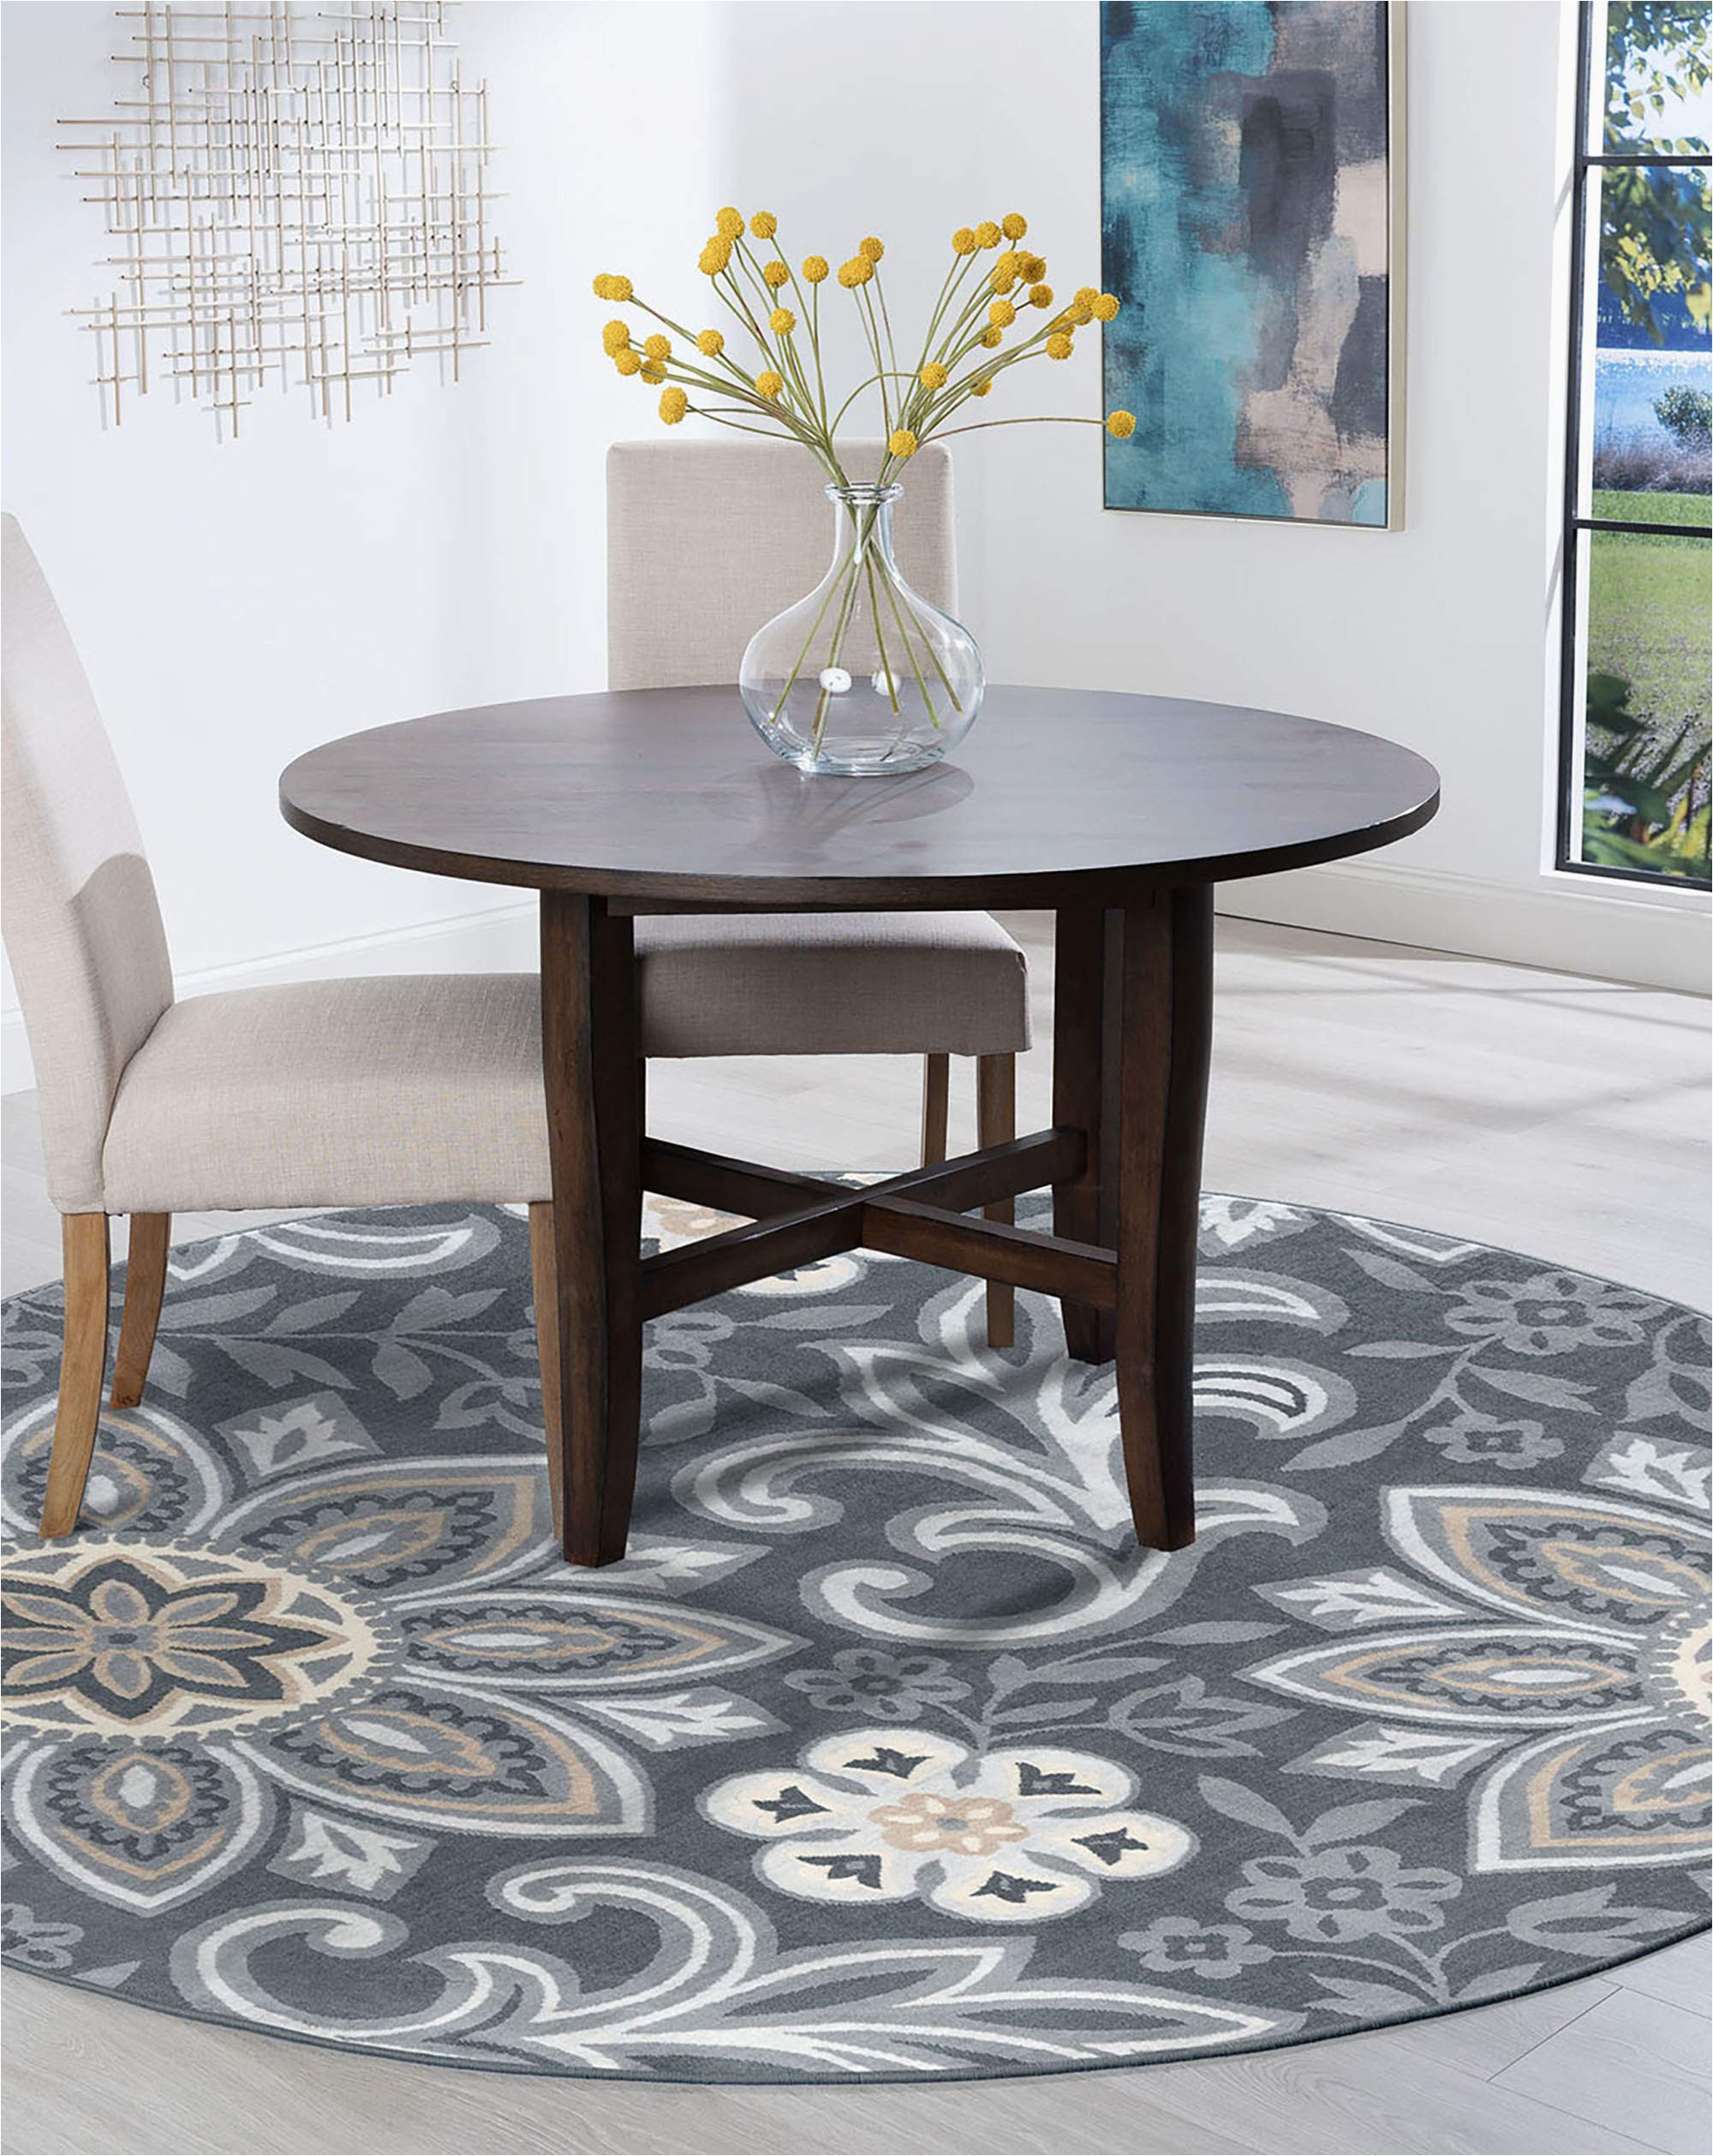 Piper Faux Fur area Rug Tayse Piper Dark Gray 6 Foot Round area Rug for Living Bedroom or Dining Room Transitional Floral